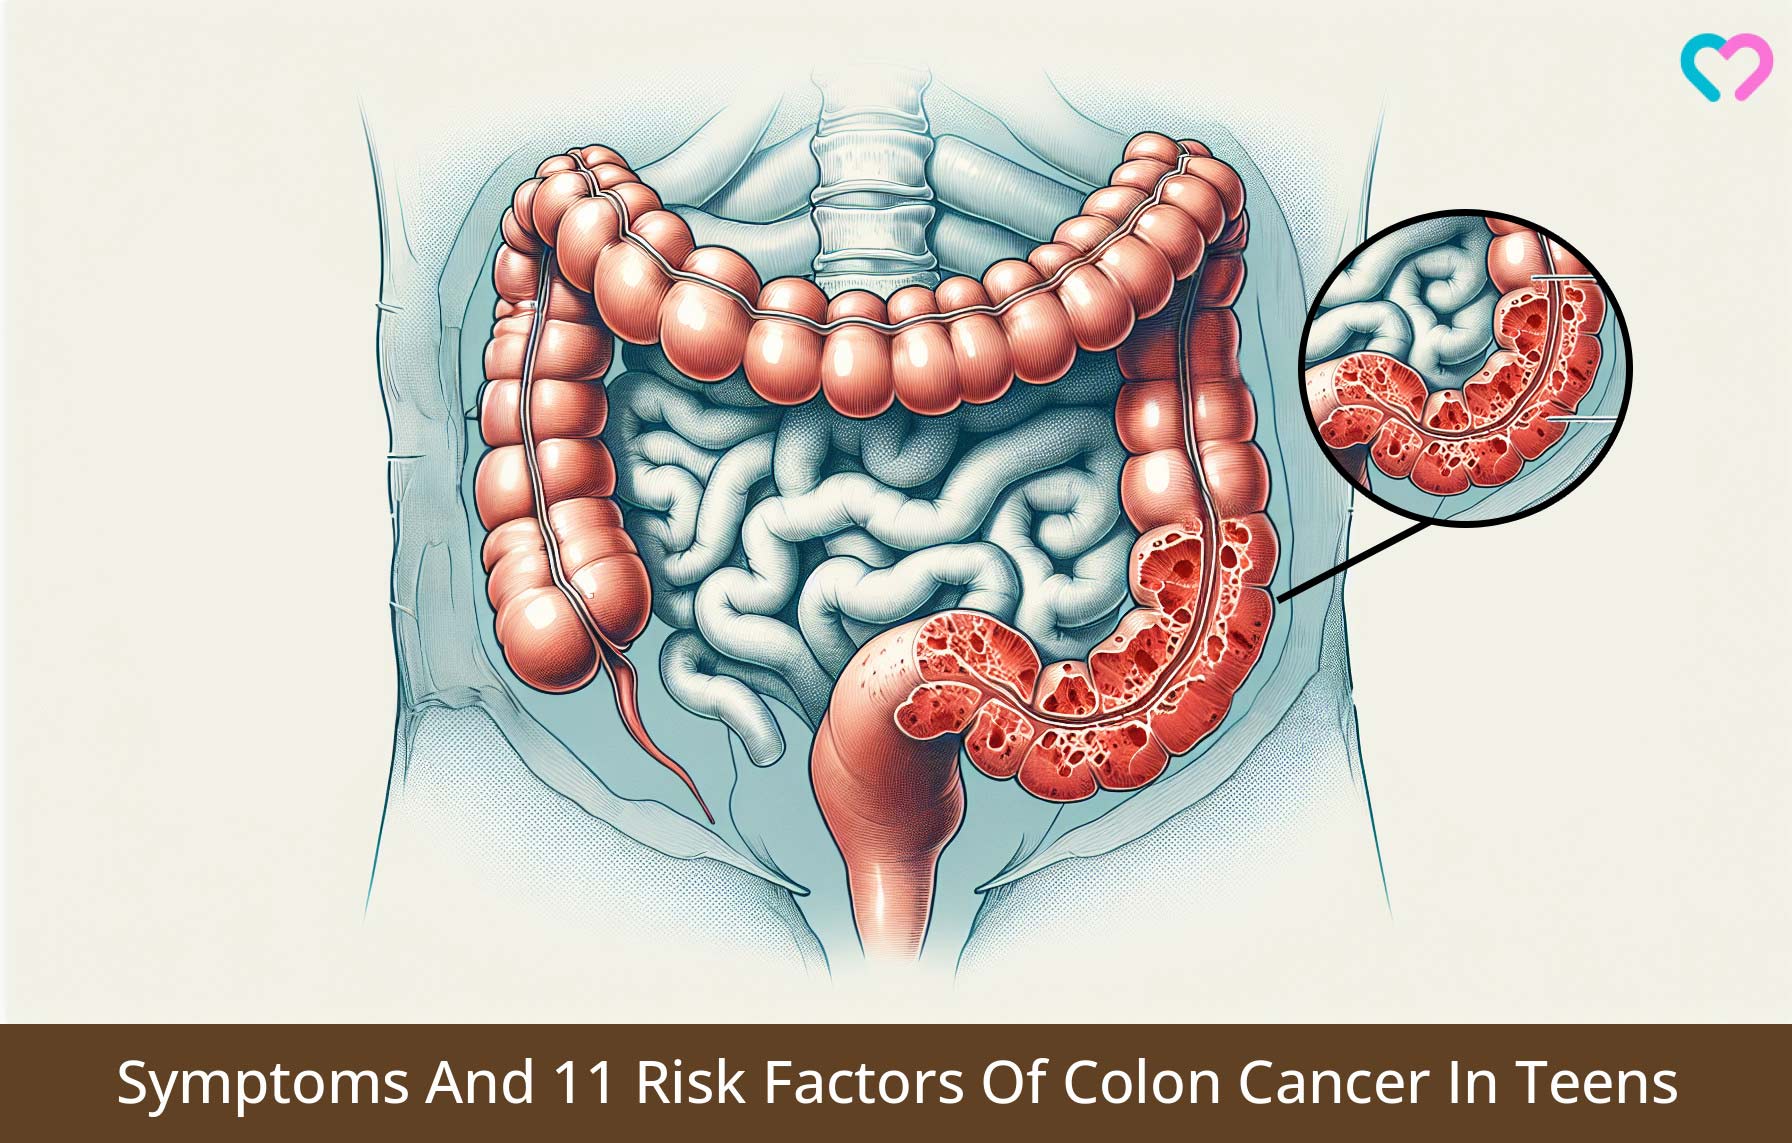 Symptoms And 11 Risk Factors Of Colon Cancer In Teens_illustration